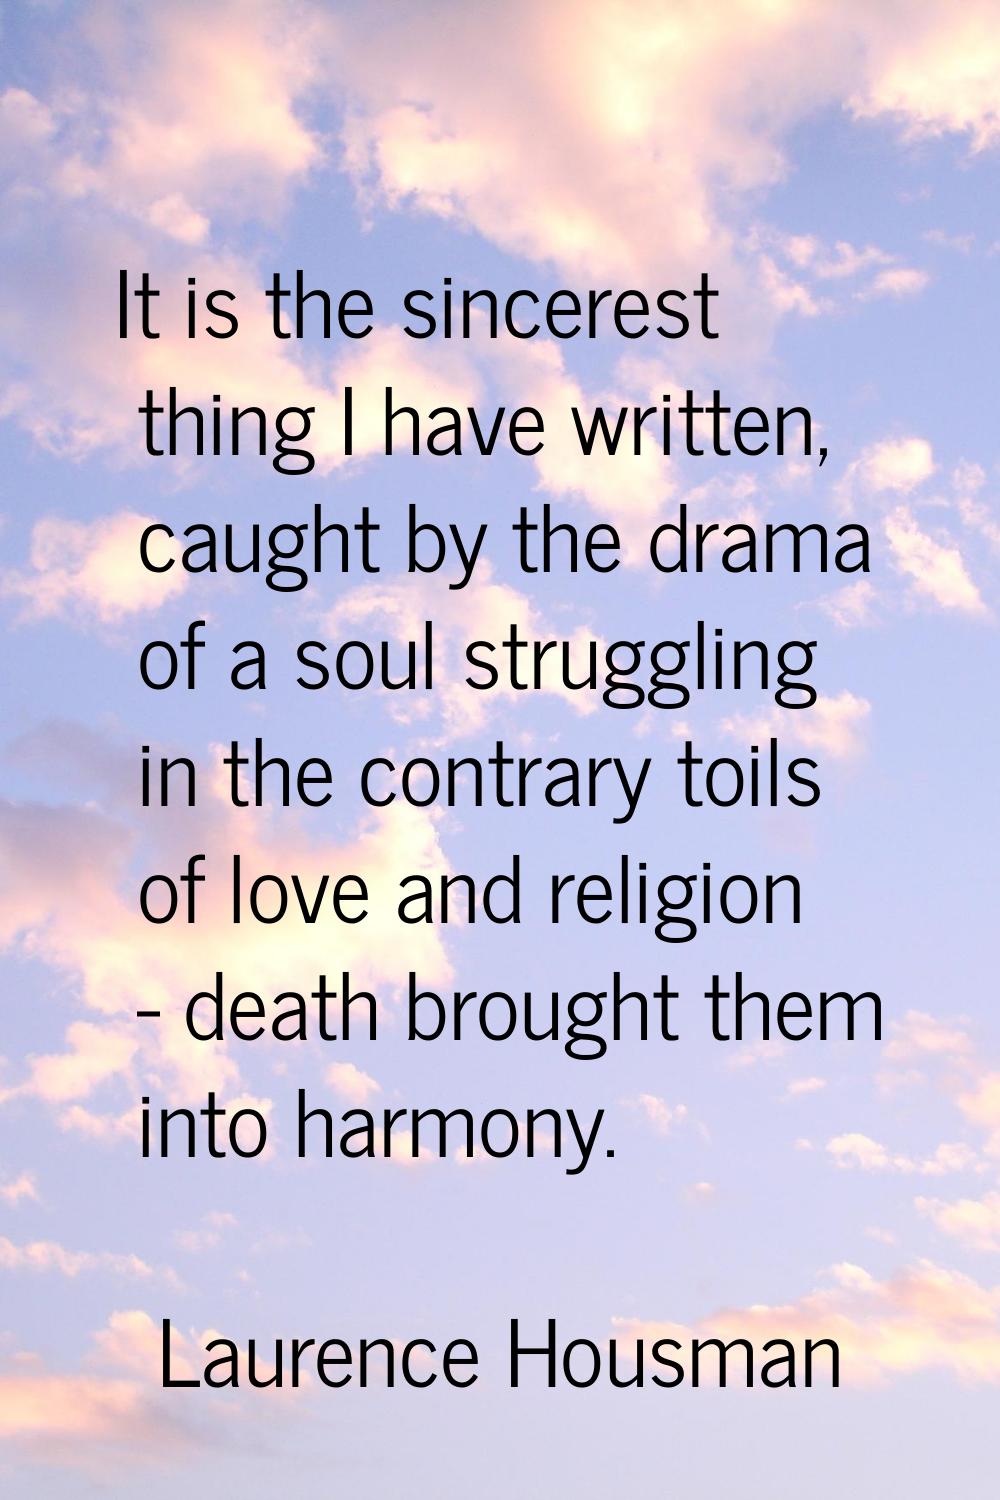 It is the sincerest thing I have written, caught by the drama of a soul struggling in the contrary 